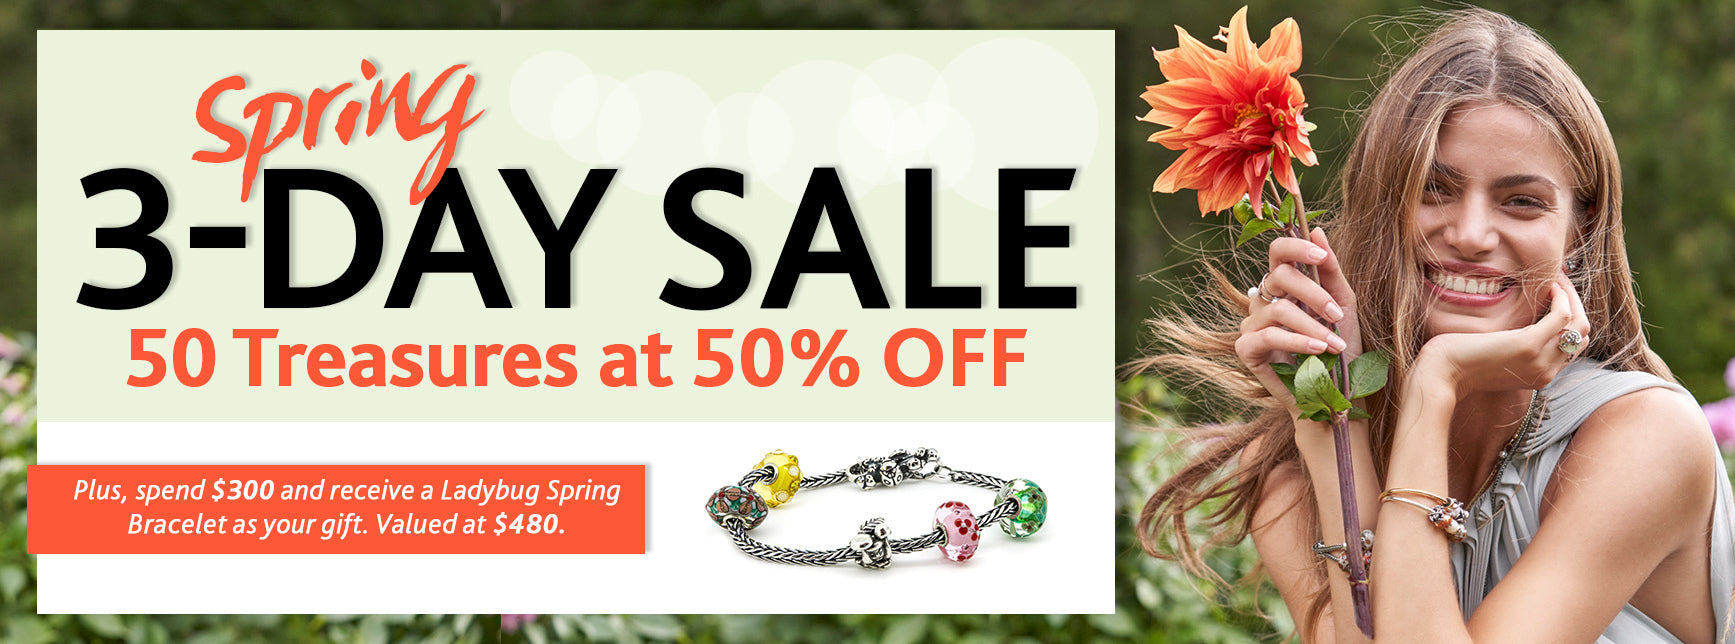 ☀️ SPRING FLASH SALE and BRACELET GIFT WITH PURCHASE ☀️